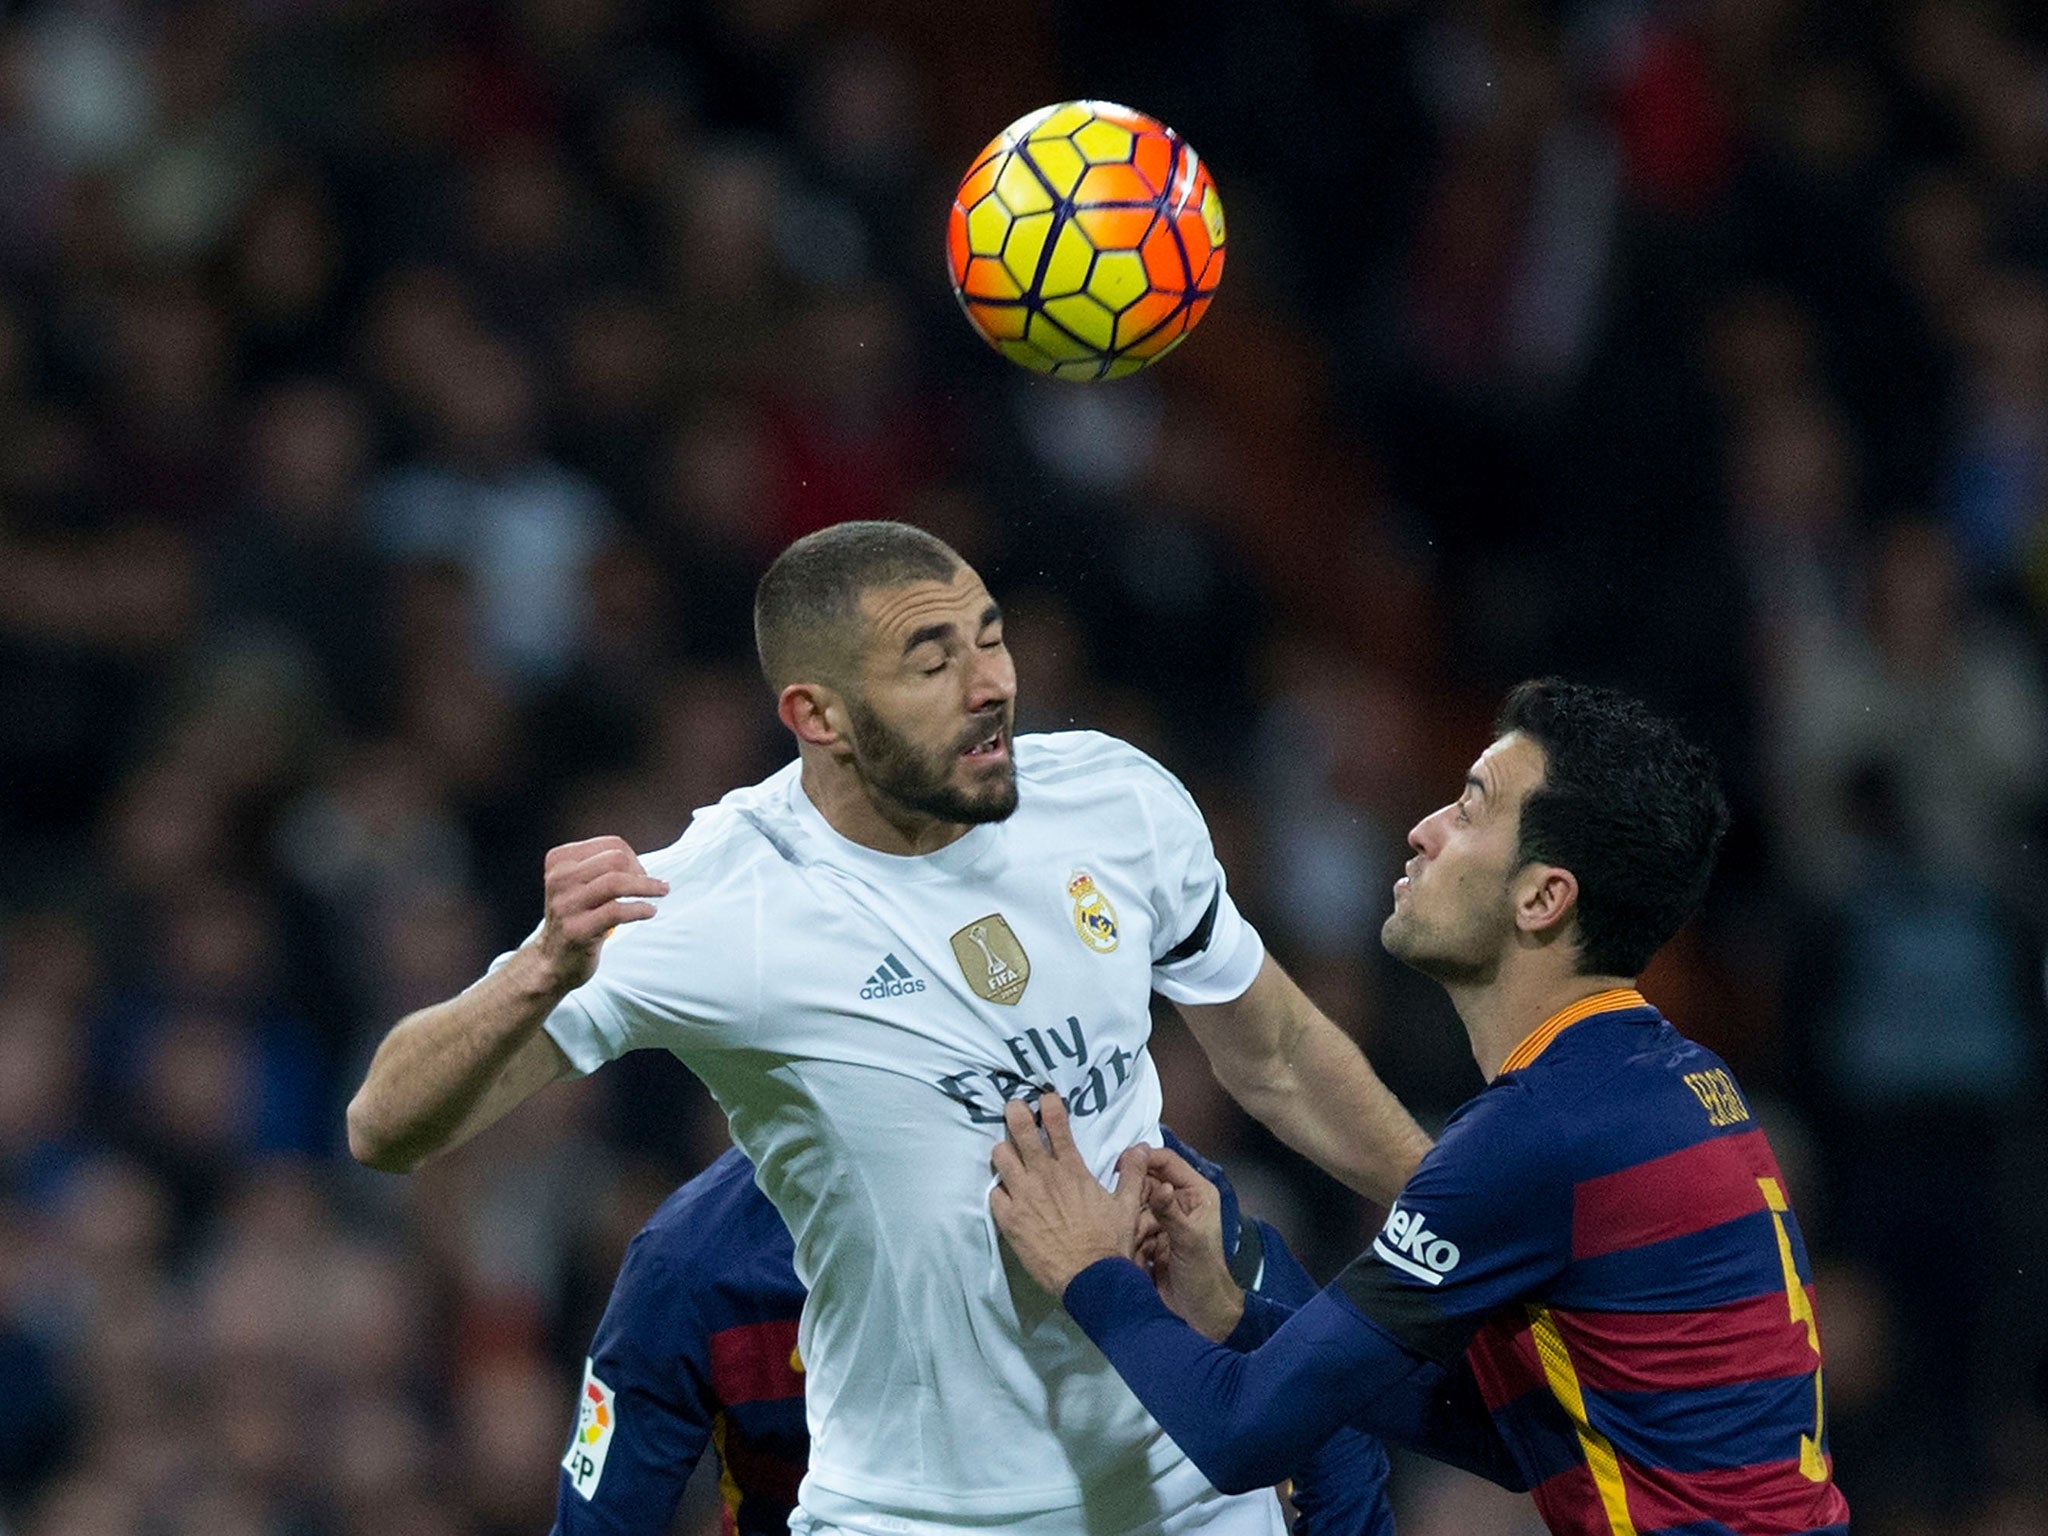 Real Madrid striker Karim Benzema reported to training on Sunday after the loss to Barcelona